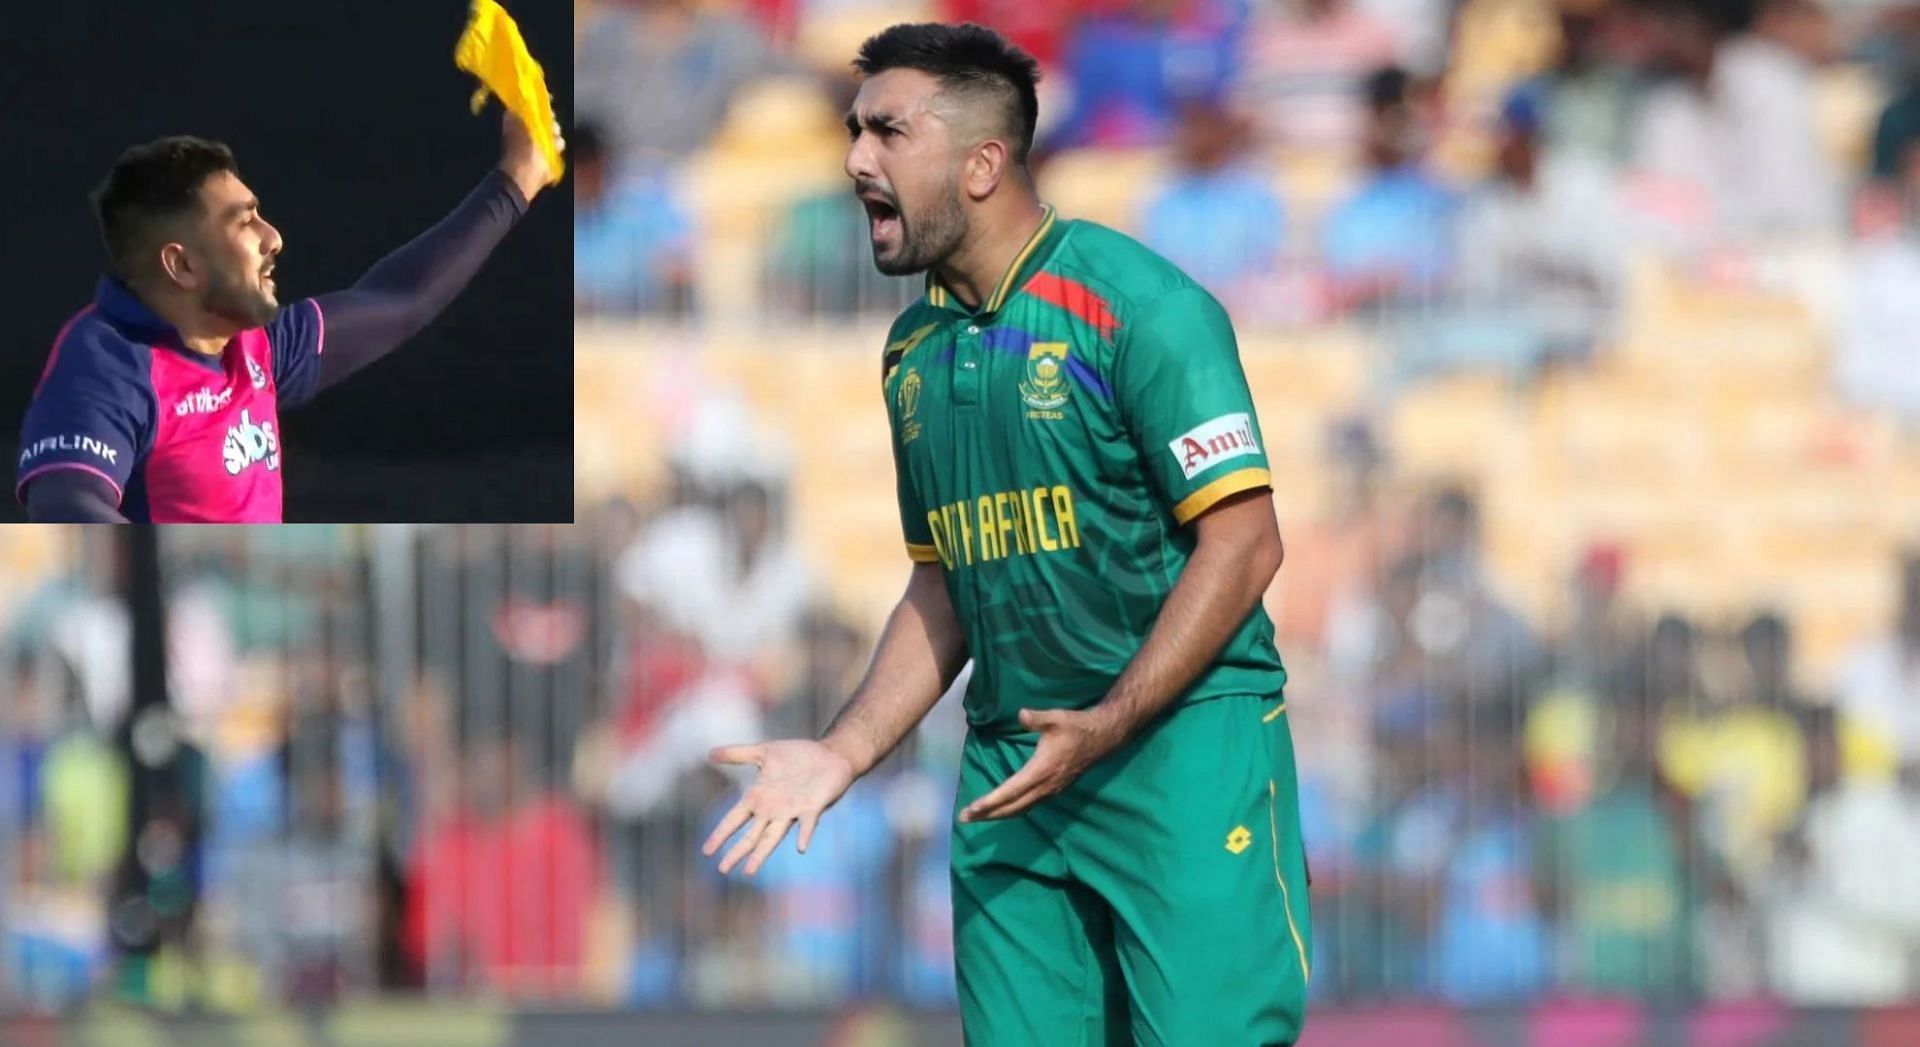 [Watch] Tabraiz Shamsi's magical celebrations during double wicket maiden in SA20